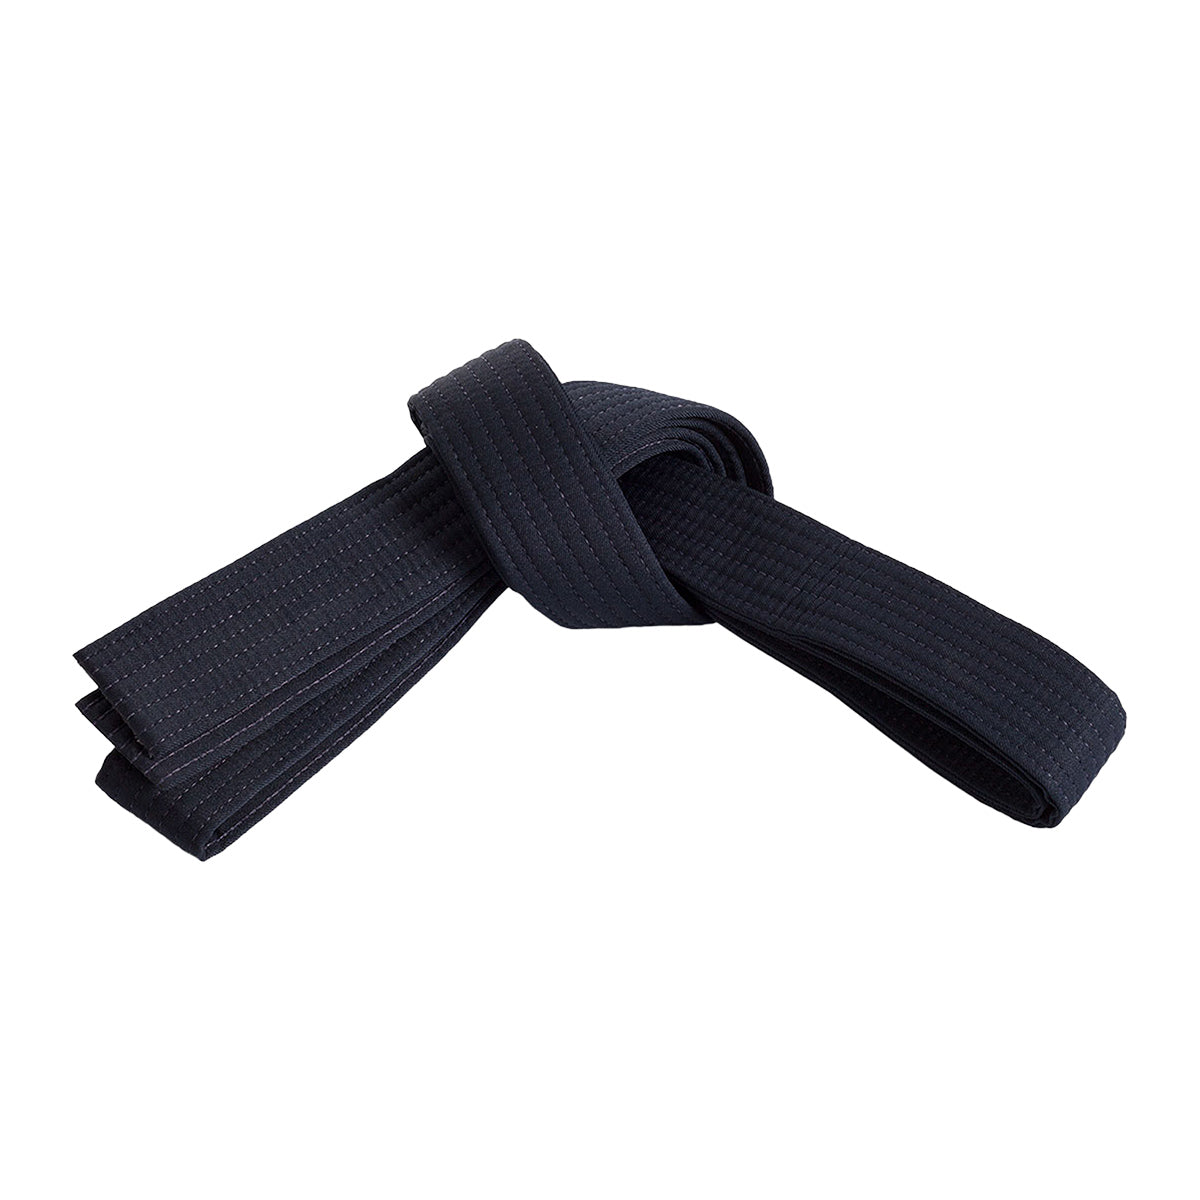 Double Wrap Solid Belt-Additional Colors Navy